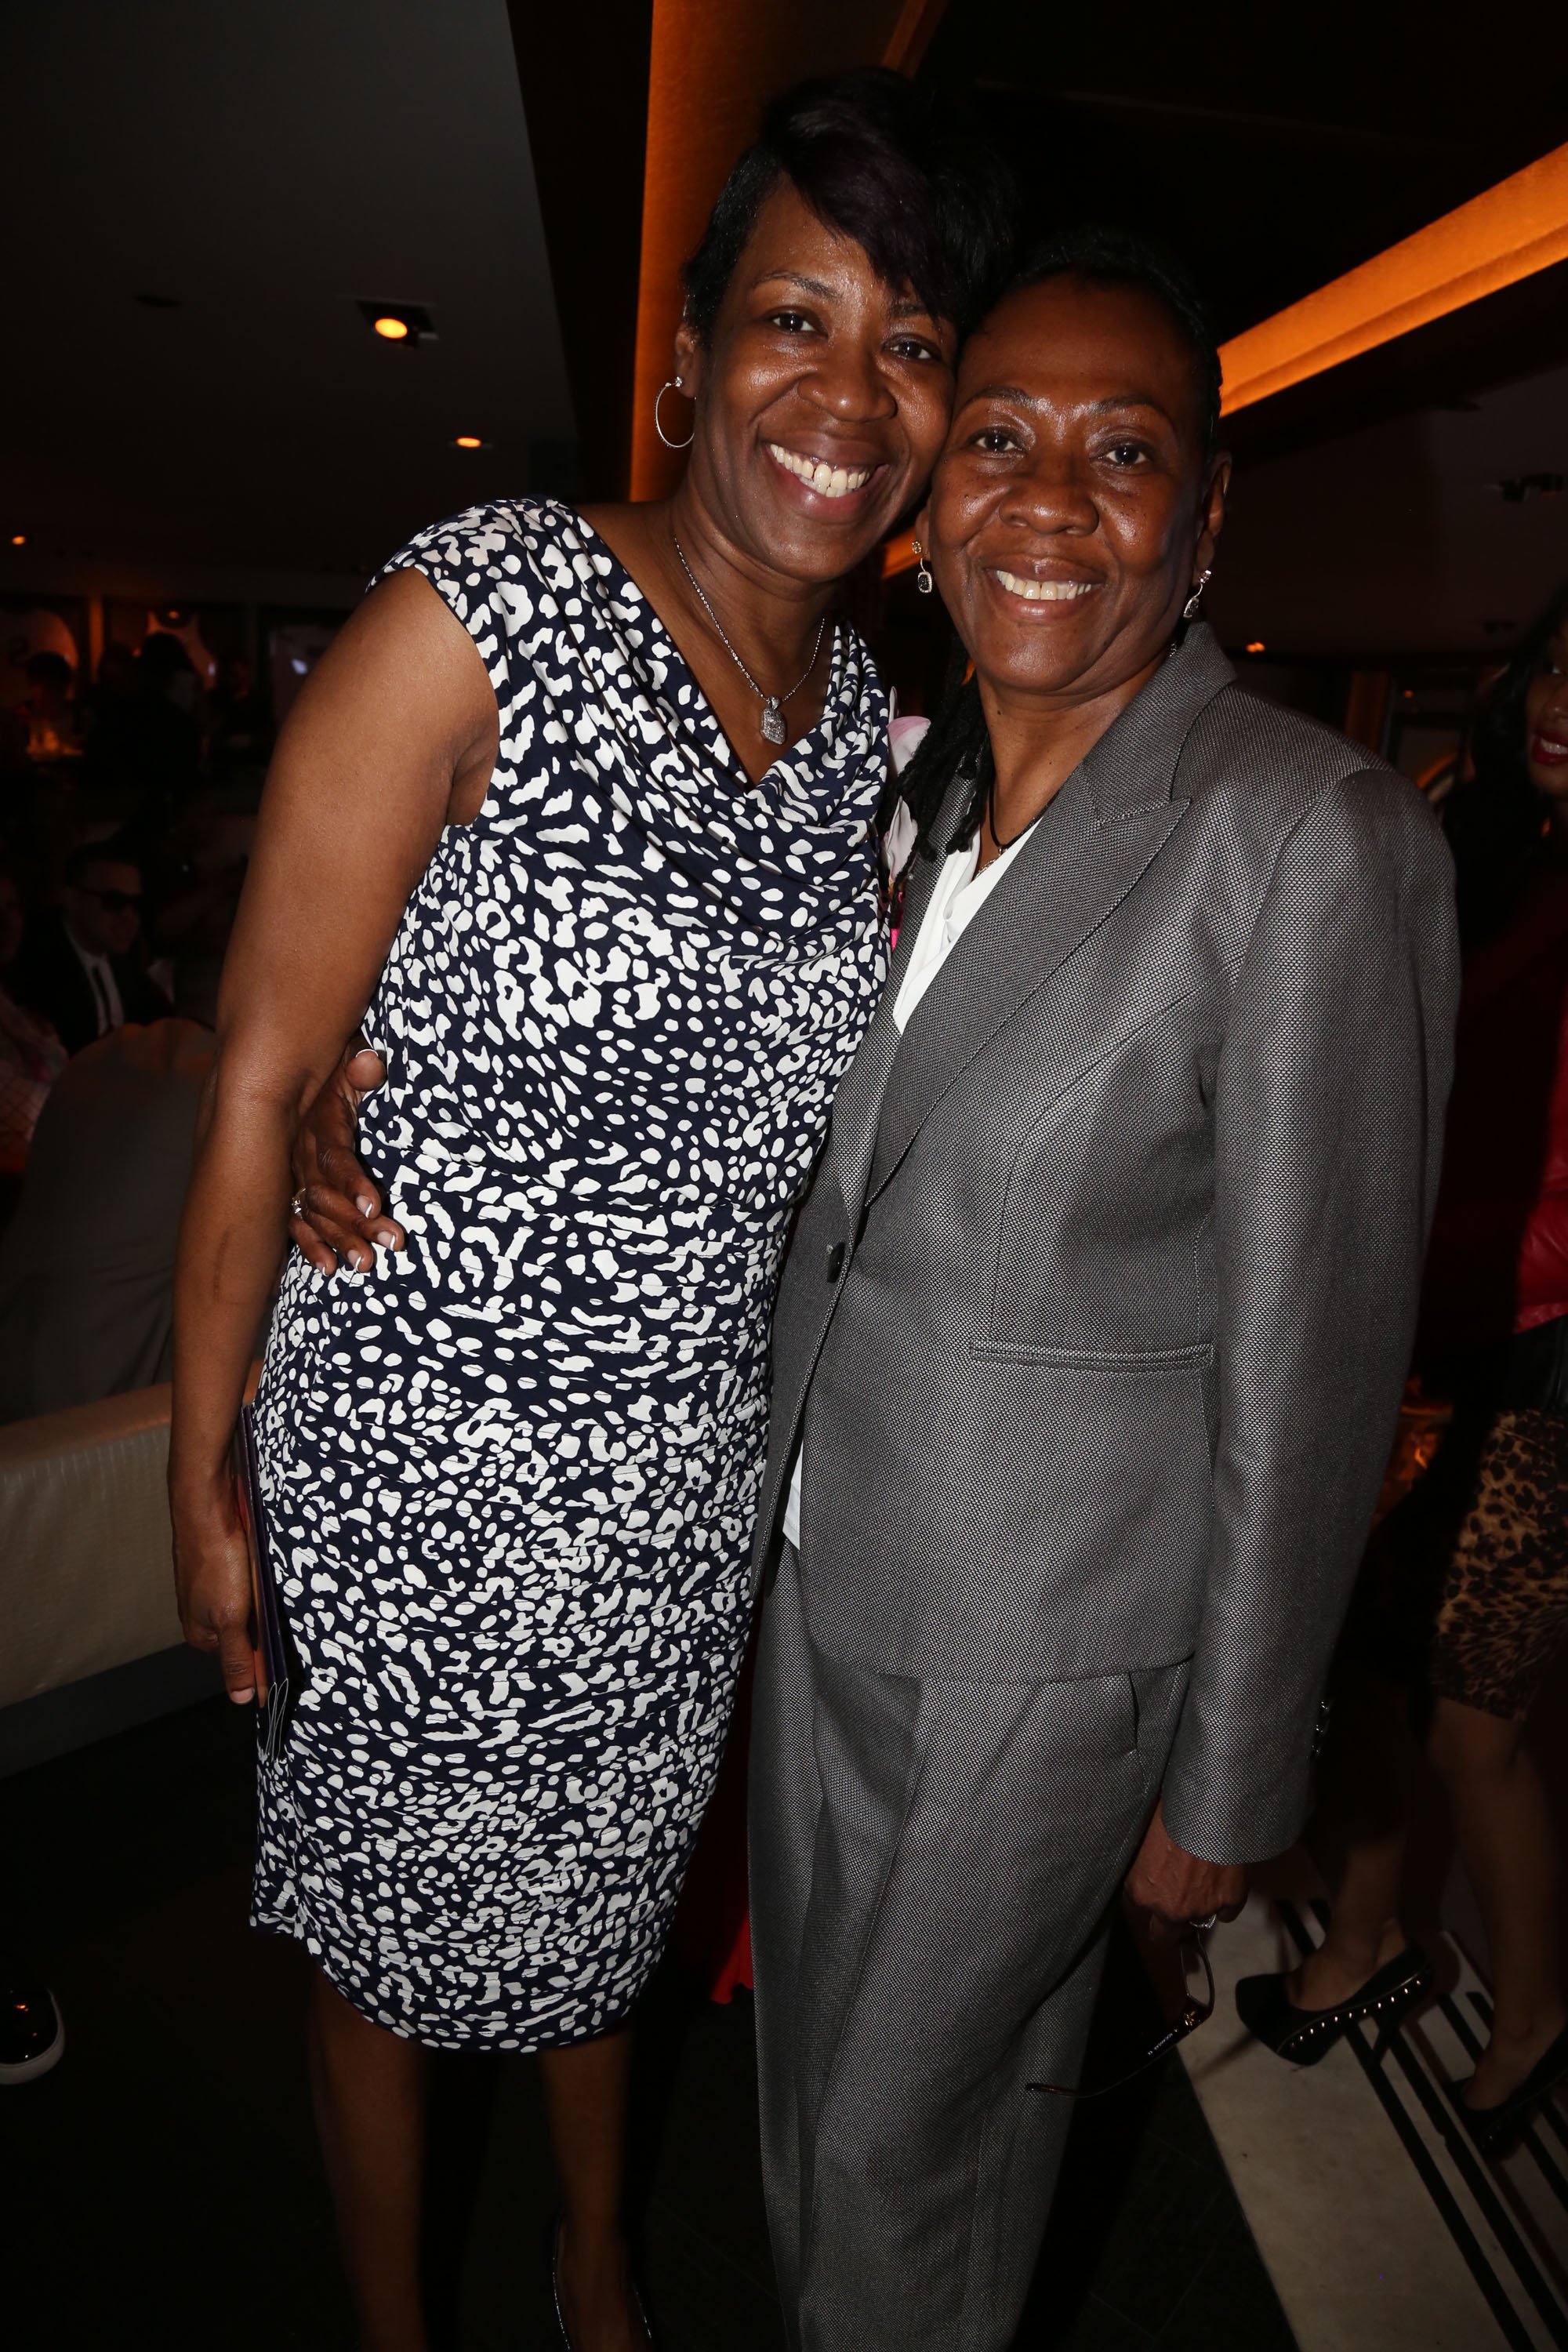 Gloria Carter and Michelle Carter at the Shawn Carter Foundation's Mother's Day event at 40 / 40 Club in New York City on May 11, 2013. | Source: Getty Images